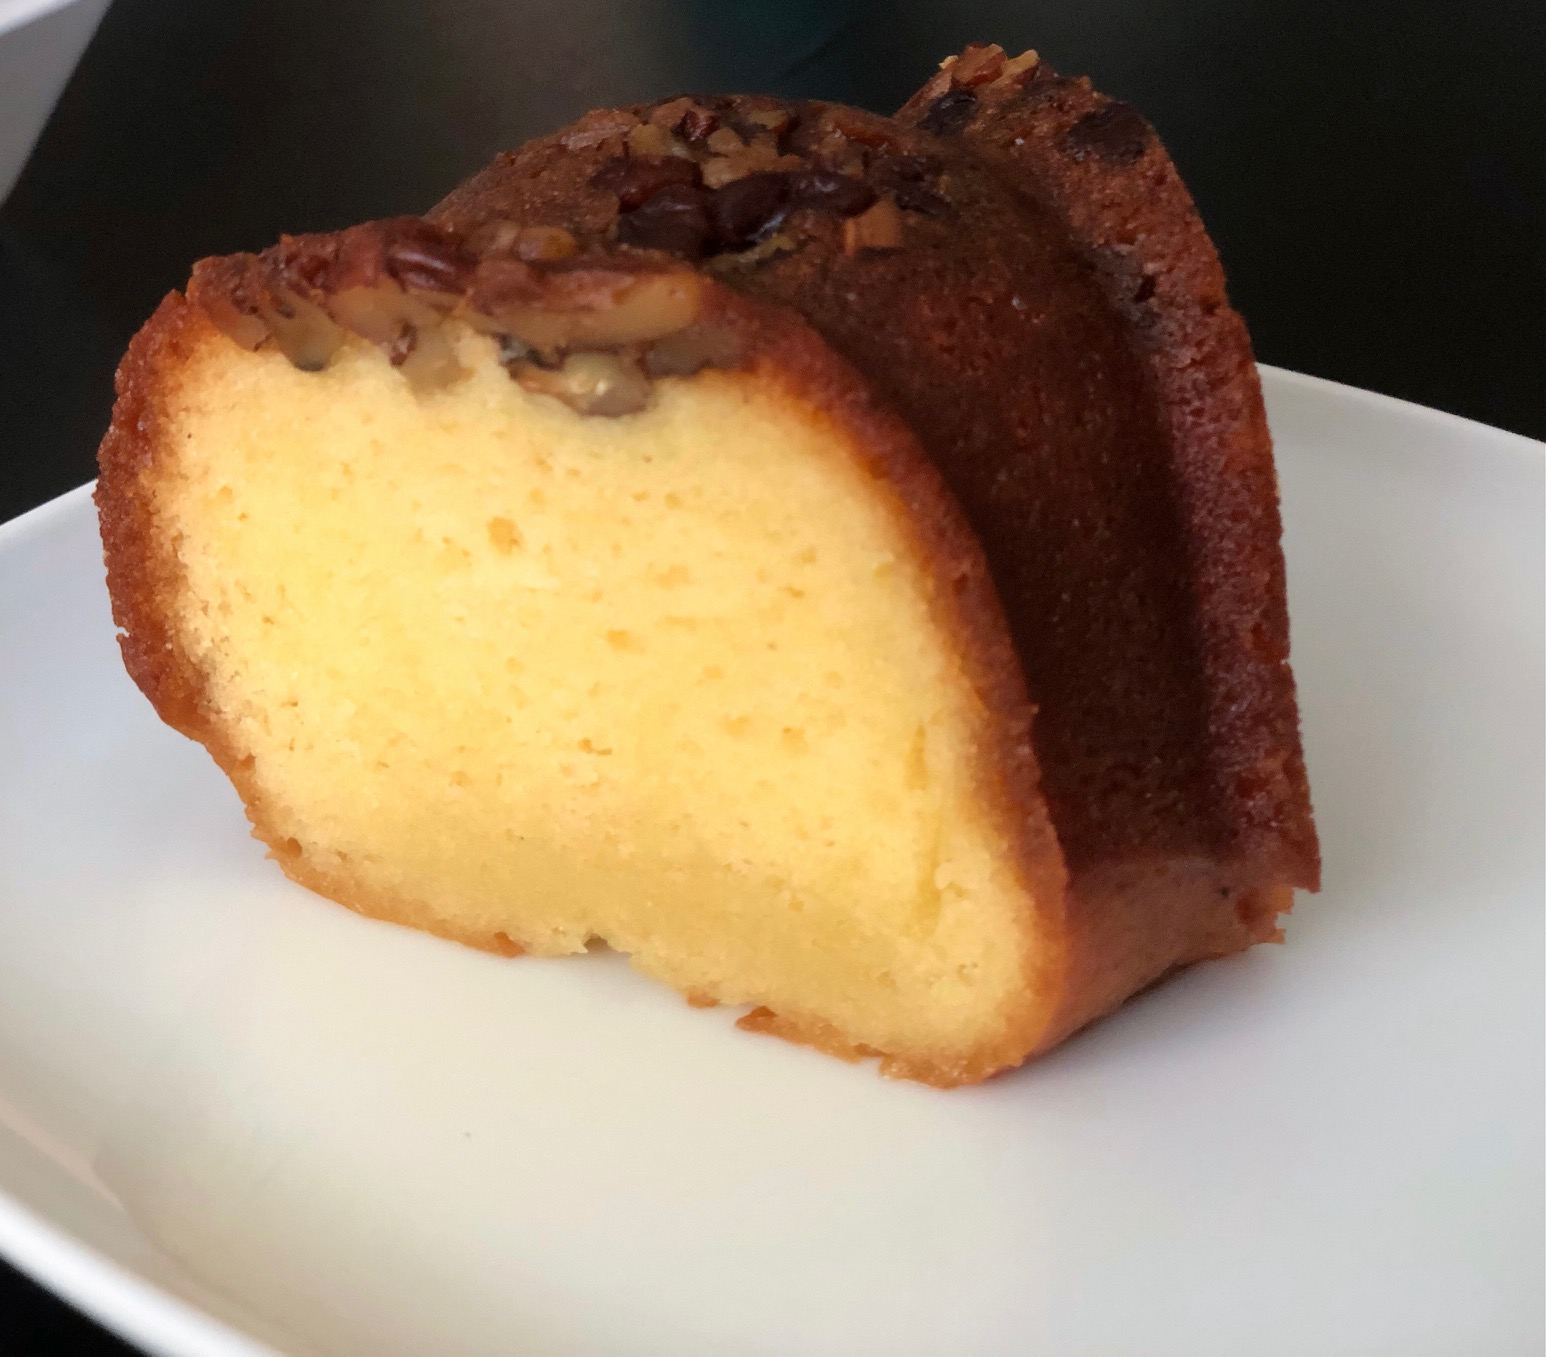 A slice of yellow rum cake from Caribbean Grill is on a white plate. The cake is a rich yellow throughout and a dark brown exterior with chopped nuts on top. Photo by Alyssa Buckley.